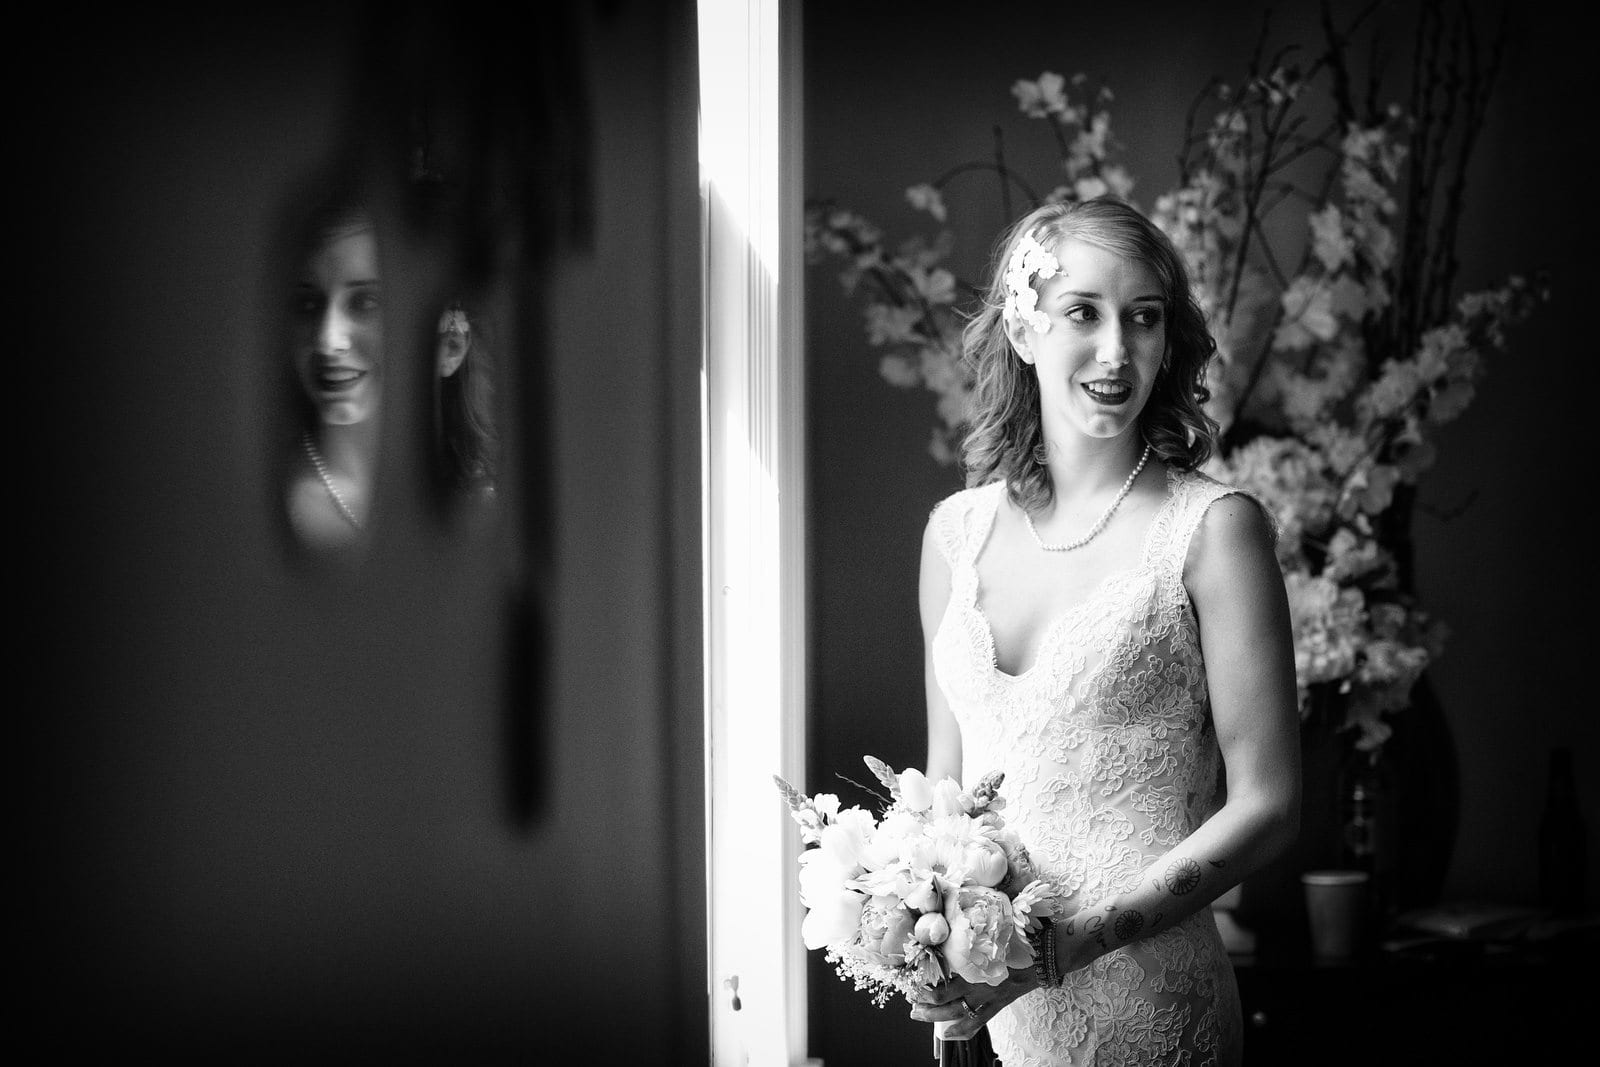 A bride with flowers in her hair stands by a window while her face is reflected in a mirror.